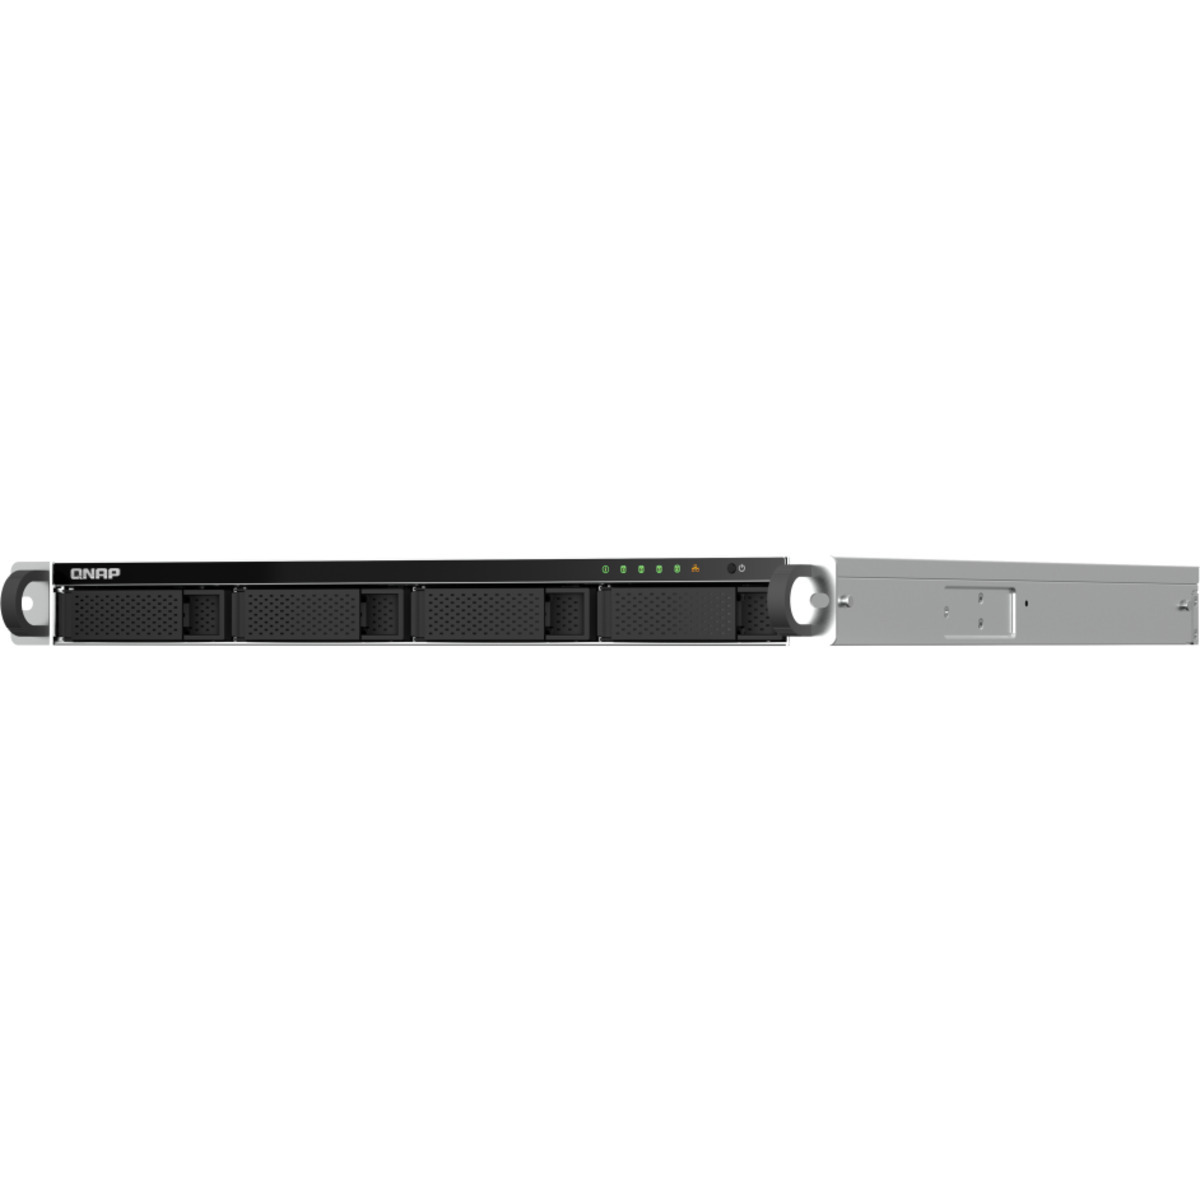 buy QNAP TS-464U 40tb RackMount NAS - Network Attached Storage Device 4x10000gb Seagate IronWolf Pro ST10000NT001 3.5 7200rpm SATA 6Gb/s HDD NAS Class Drives Installed - Burn-In Tested - ON SALE - nas headquarters buy network attached storage server device das new raid-5 free shipping usa spring sale TS-464U